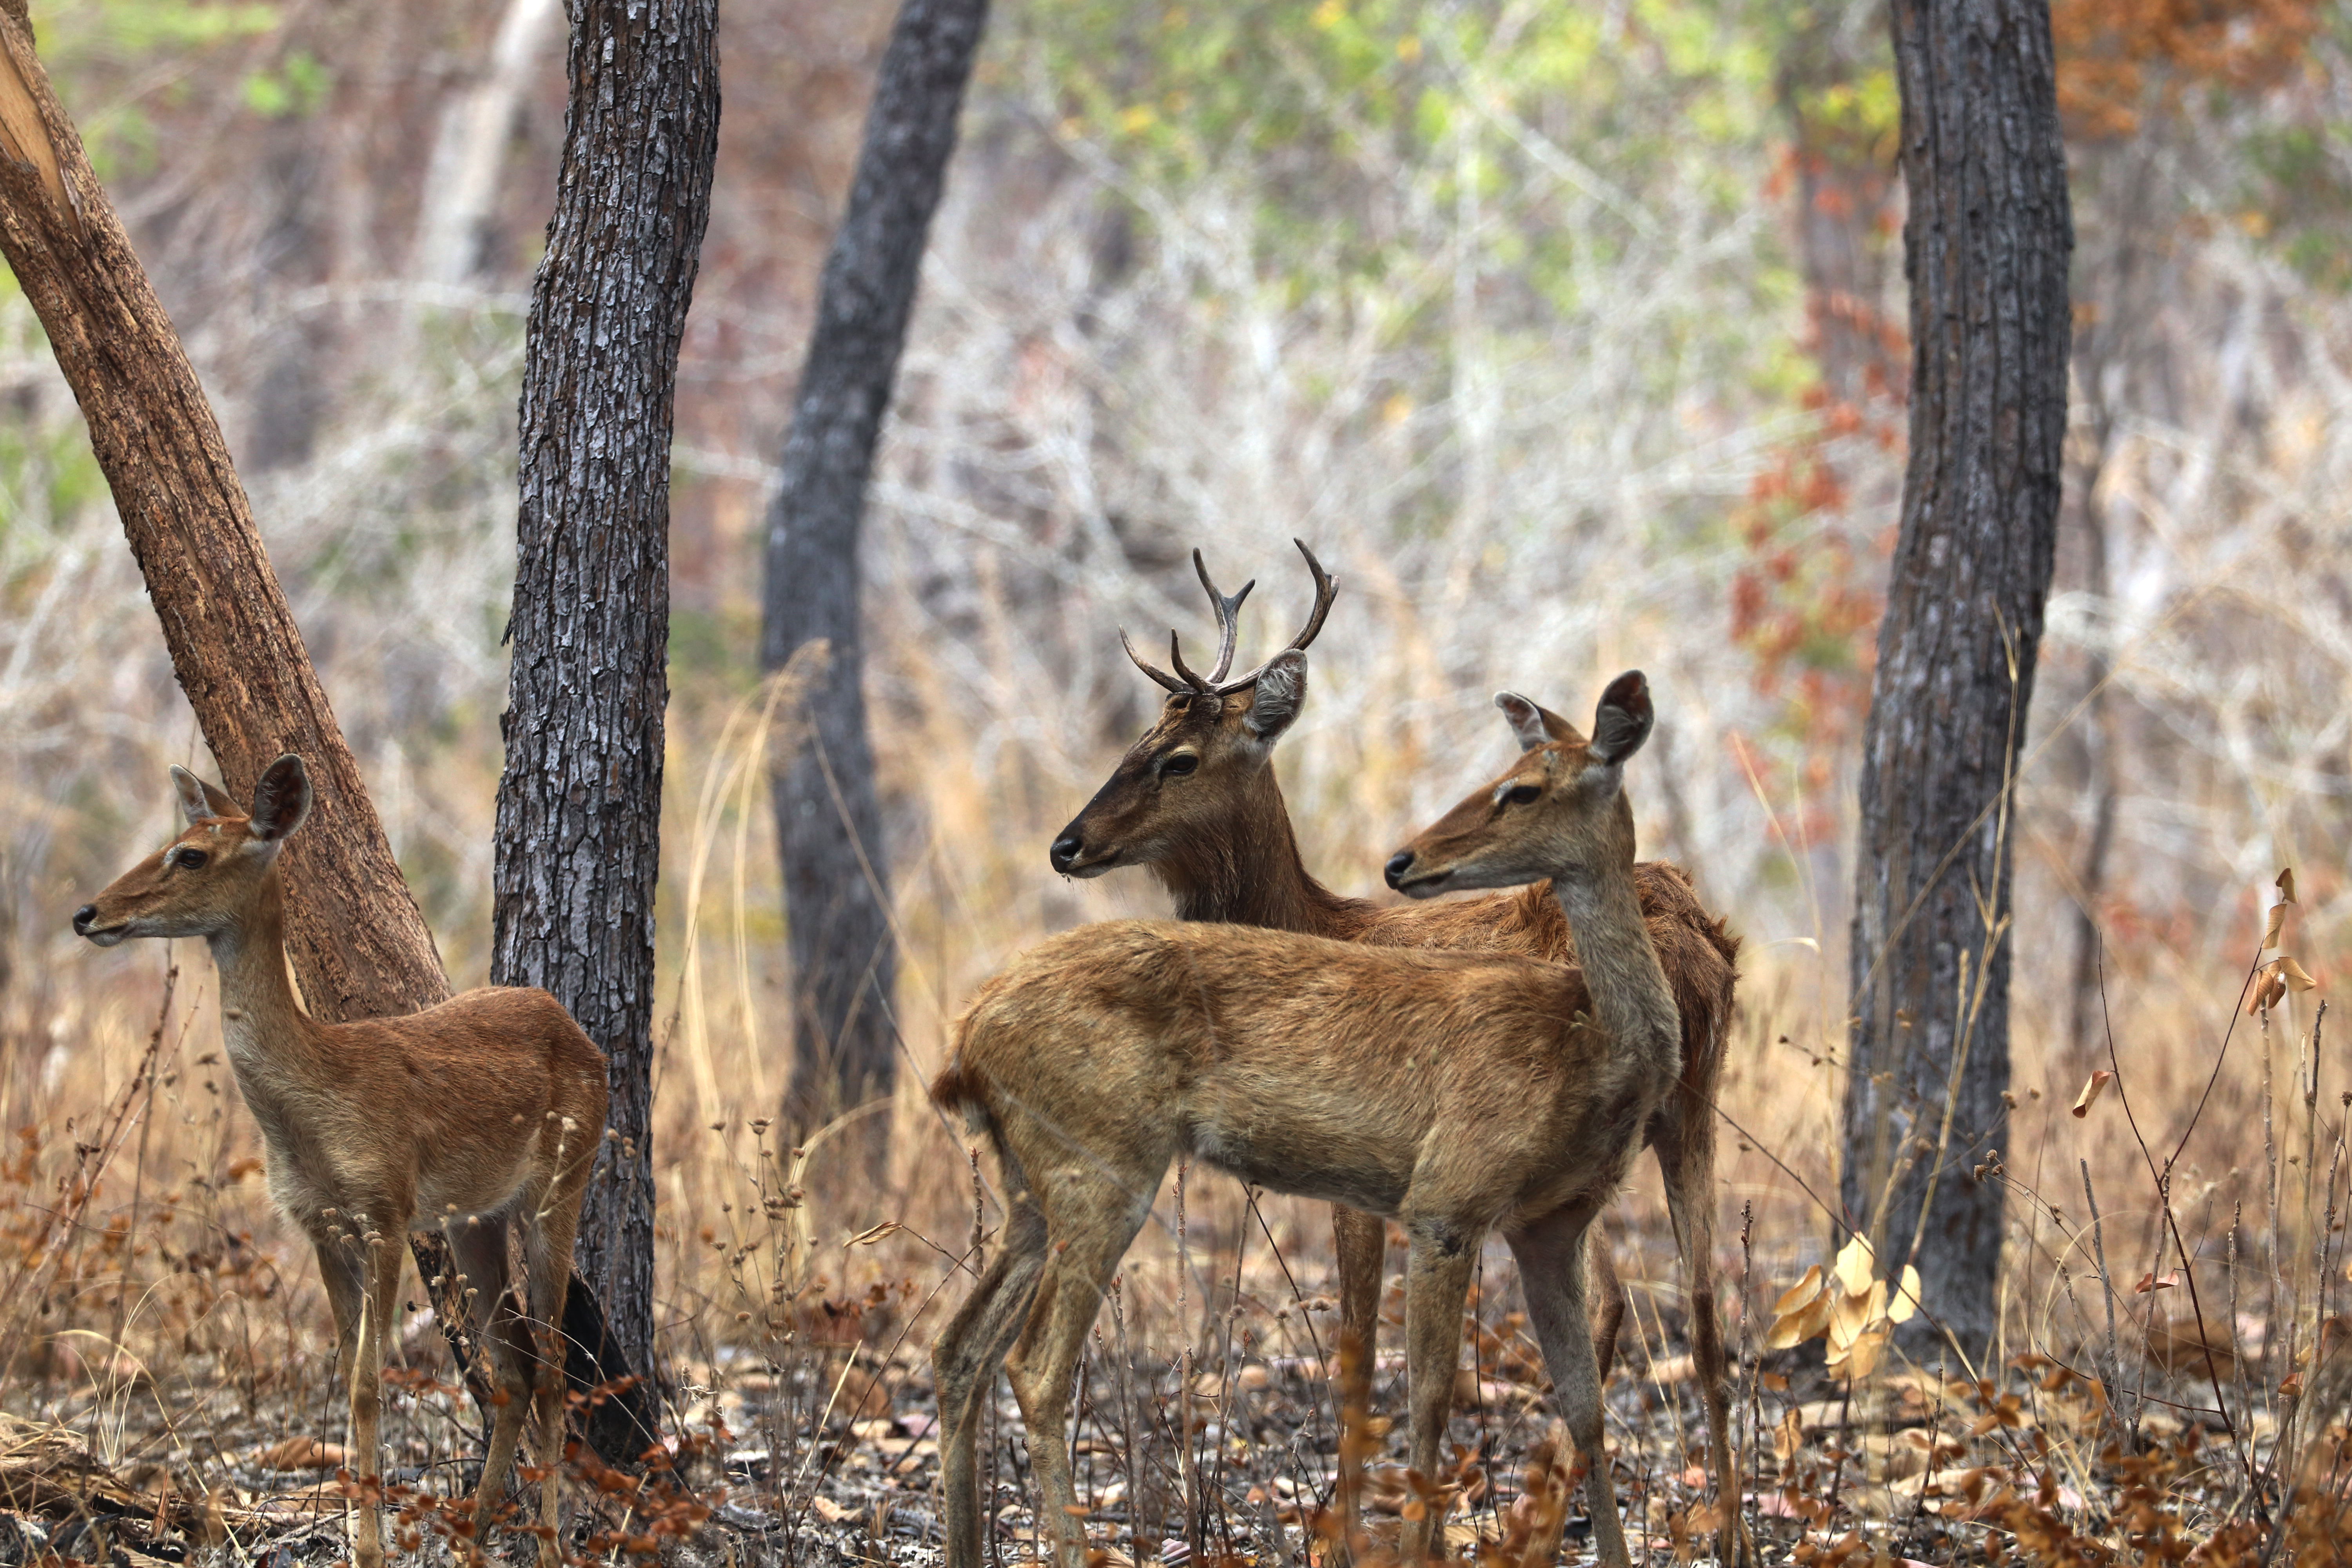 a female deer and two young deer in the woods